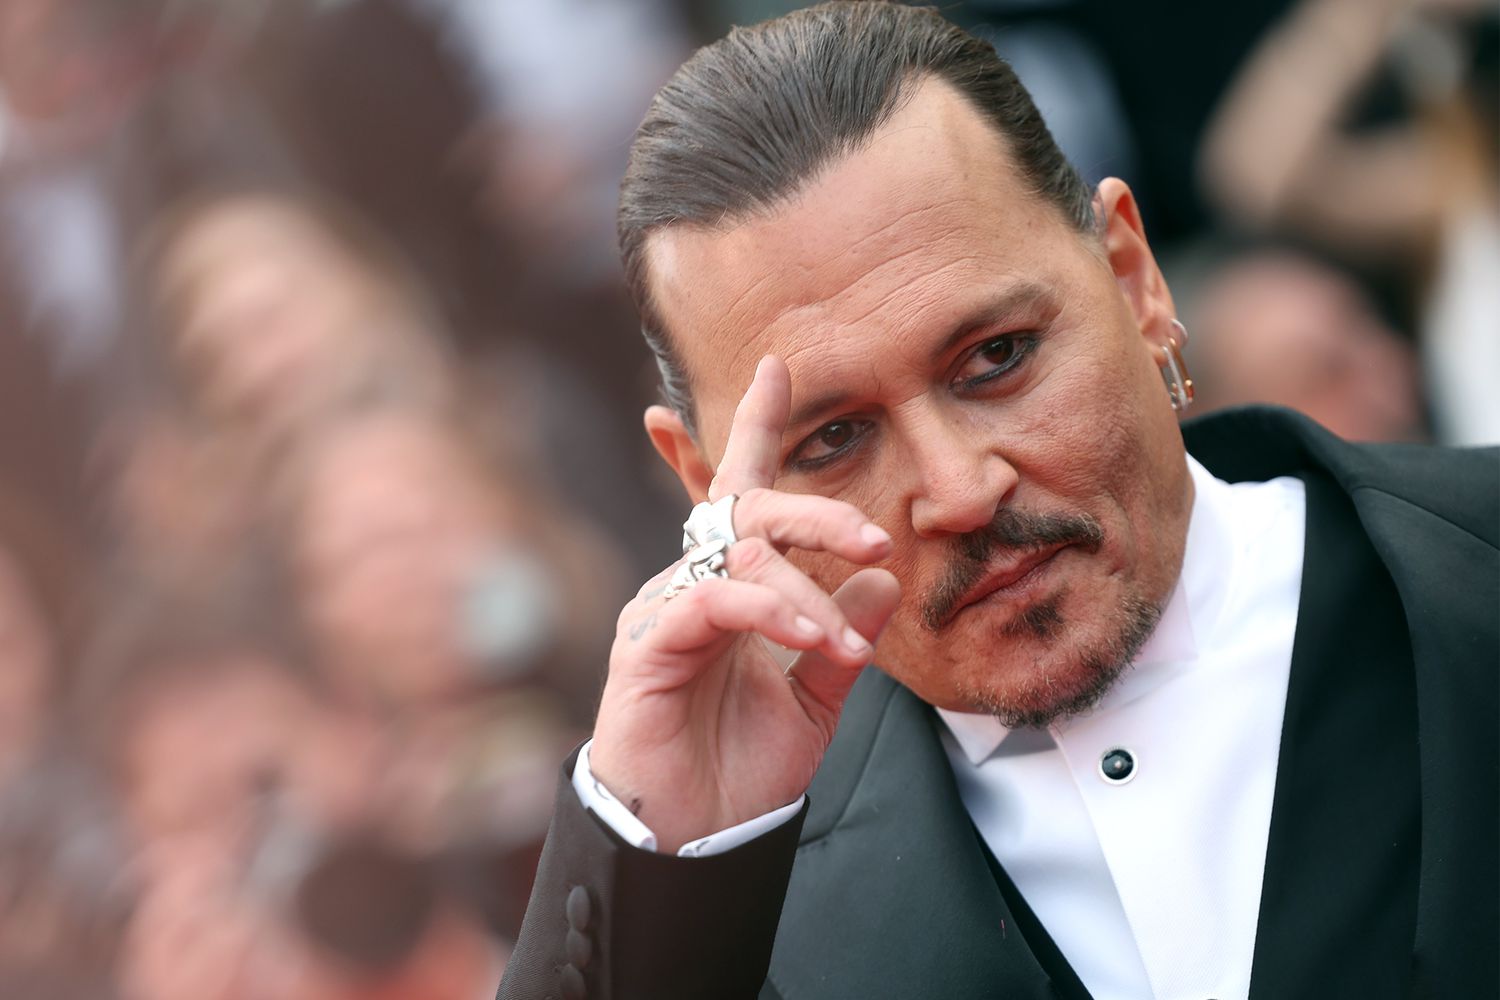 Johnny Depp slams 'horrifically written fiction' of his controversies at Cannes